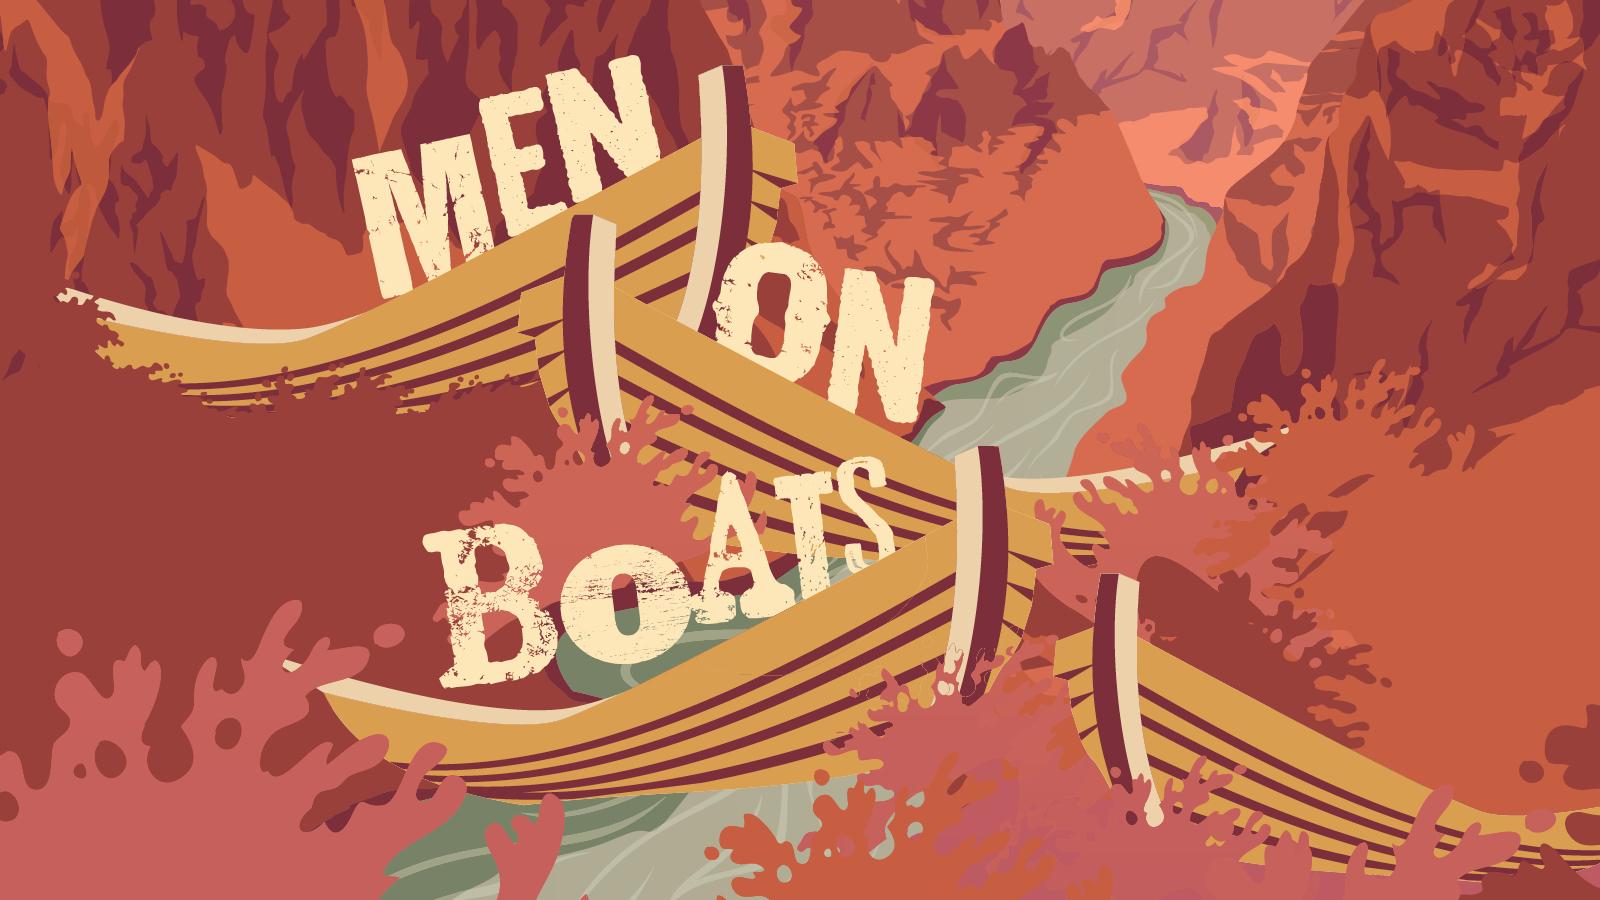 Men on Boats Graphic